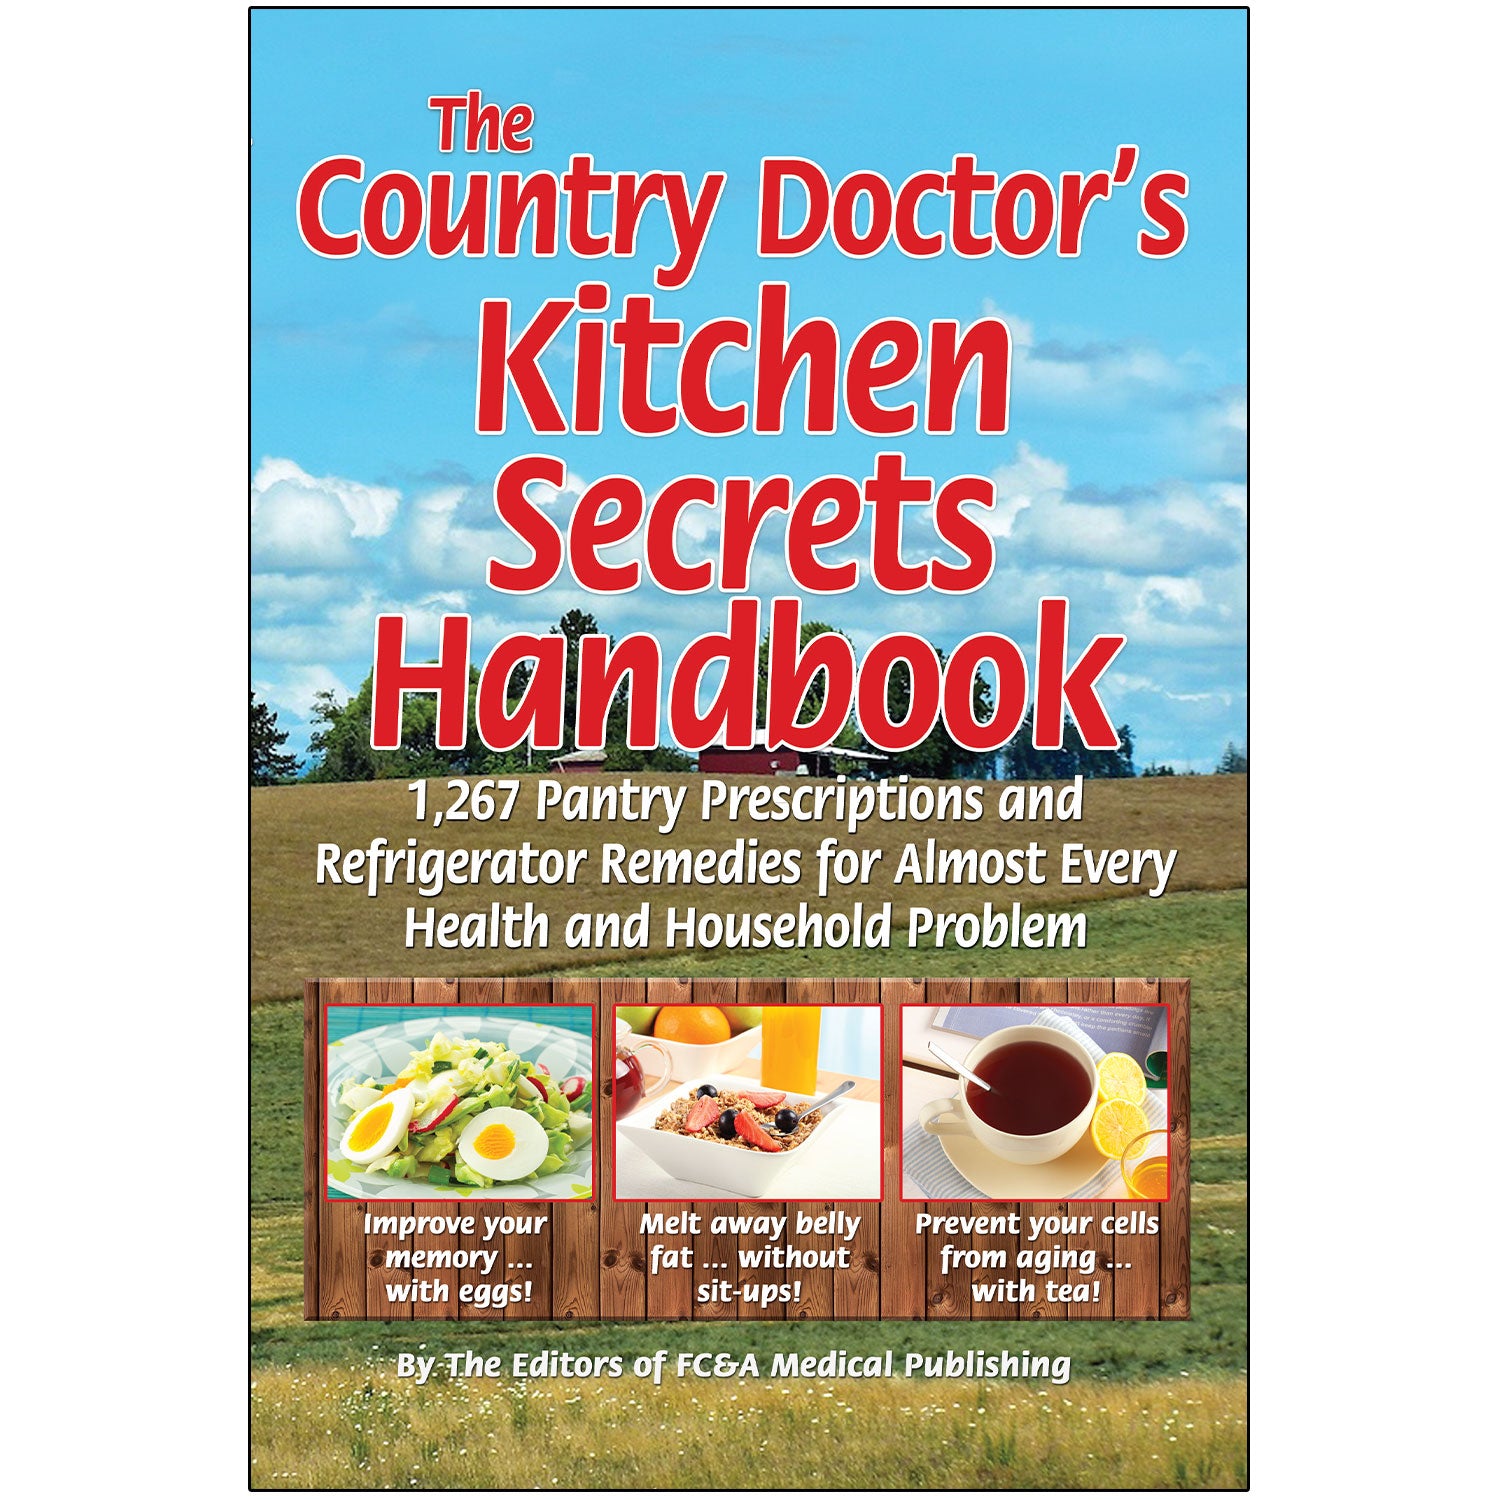 Country Doctor’s Kitchen Secrets Handbook, The | FC&A – FC&A Store